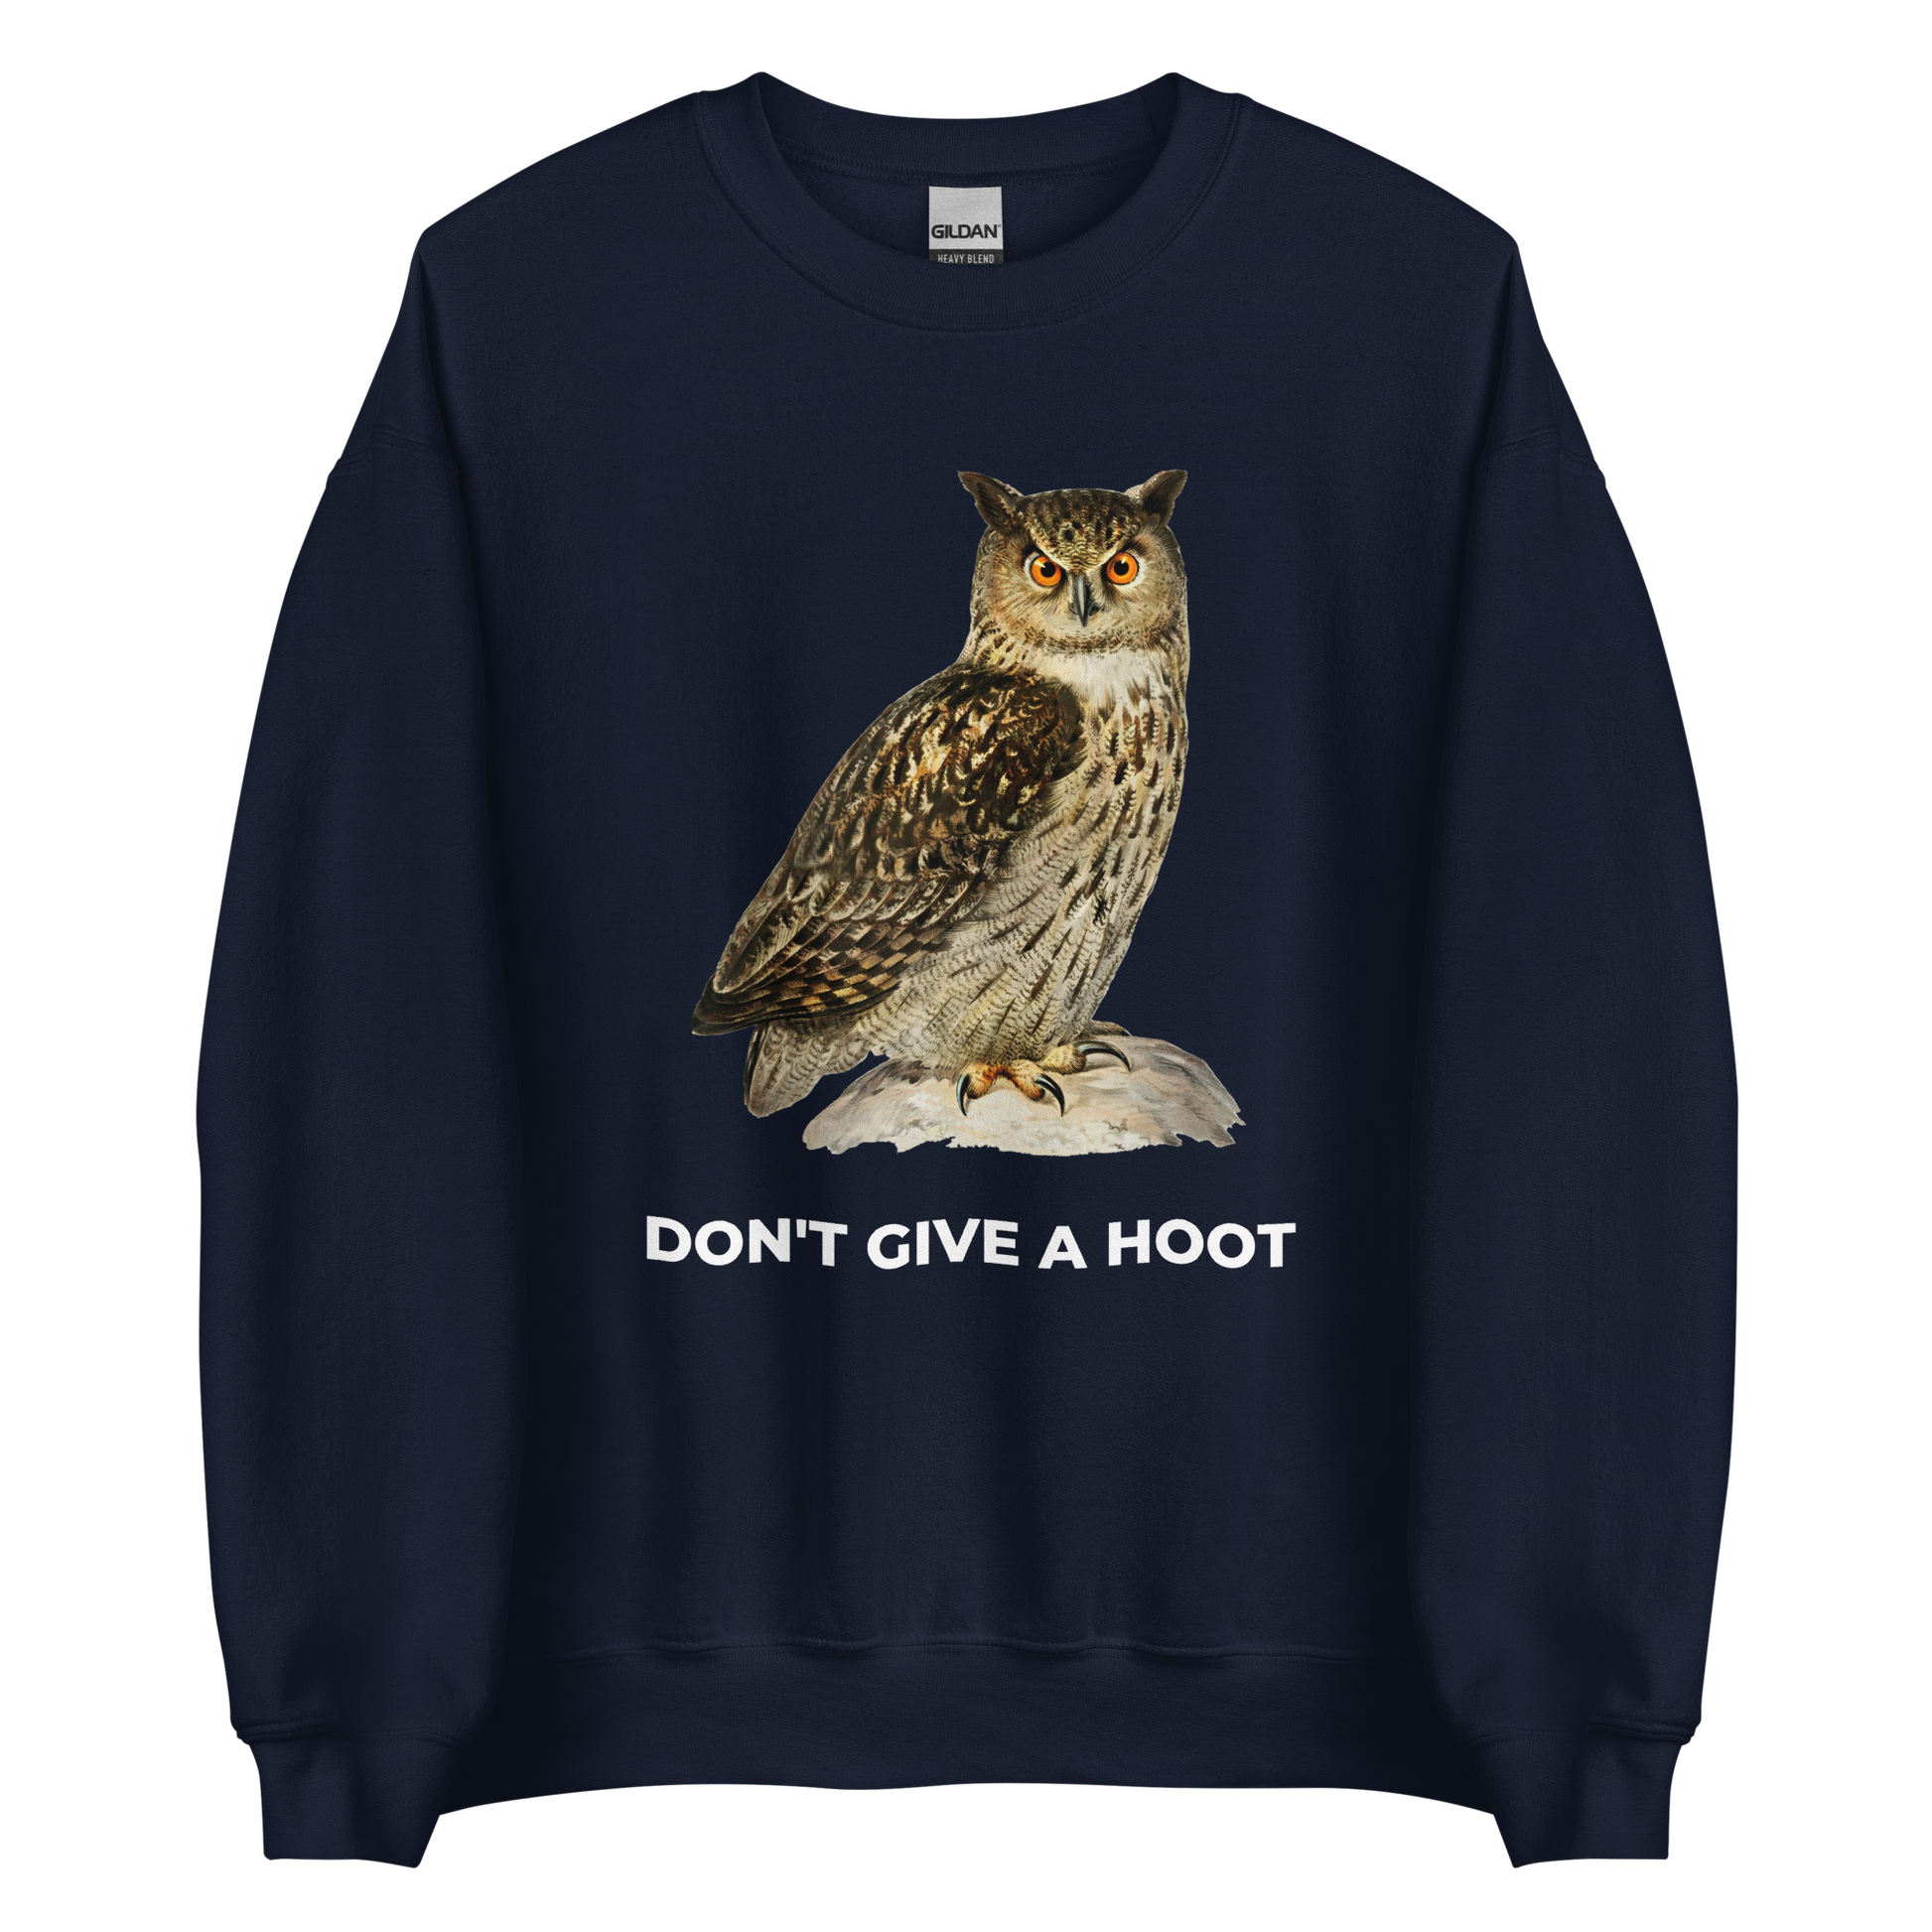 Navy Sweatshirt featuring a captivating Don't Give a Hoot graphic on the chest - Funny Graphic Owl Sweatshirts - Boozy Fox